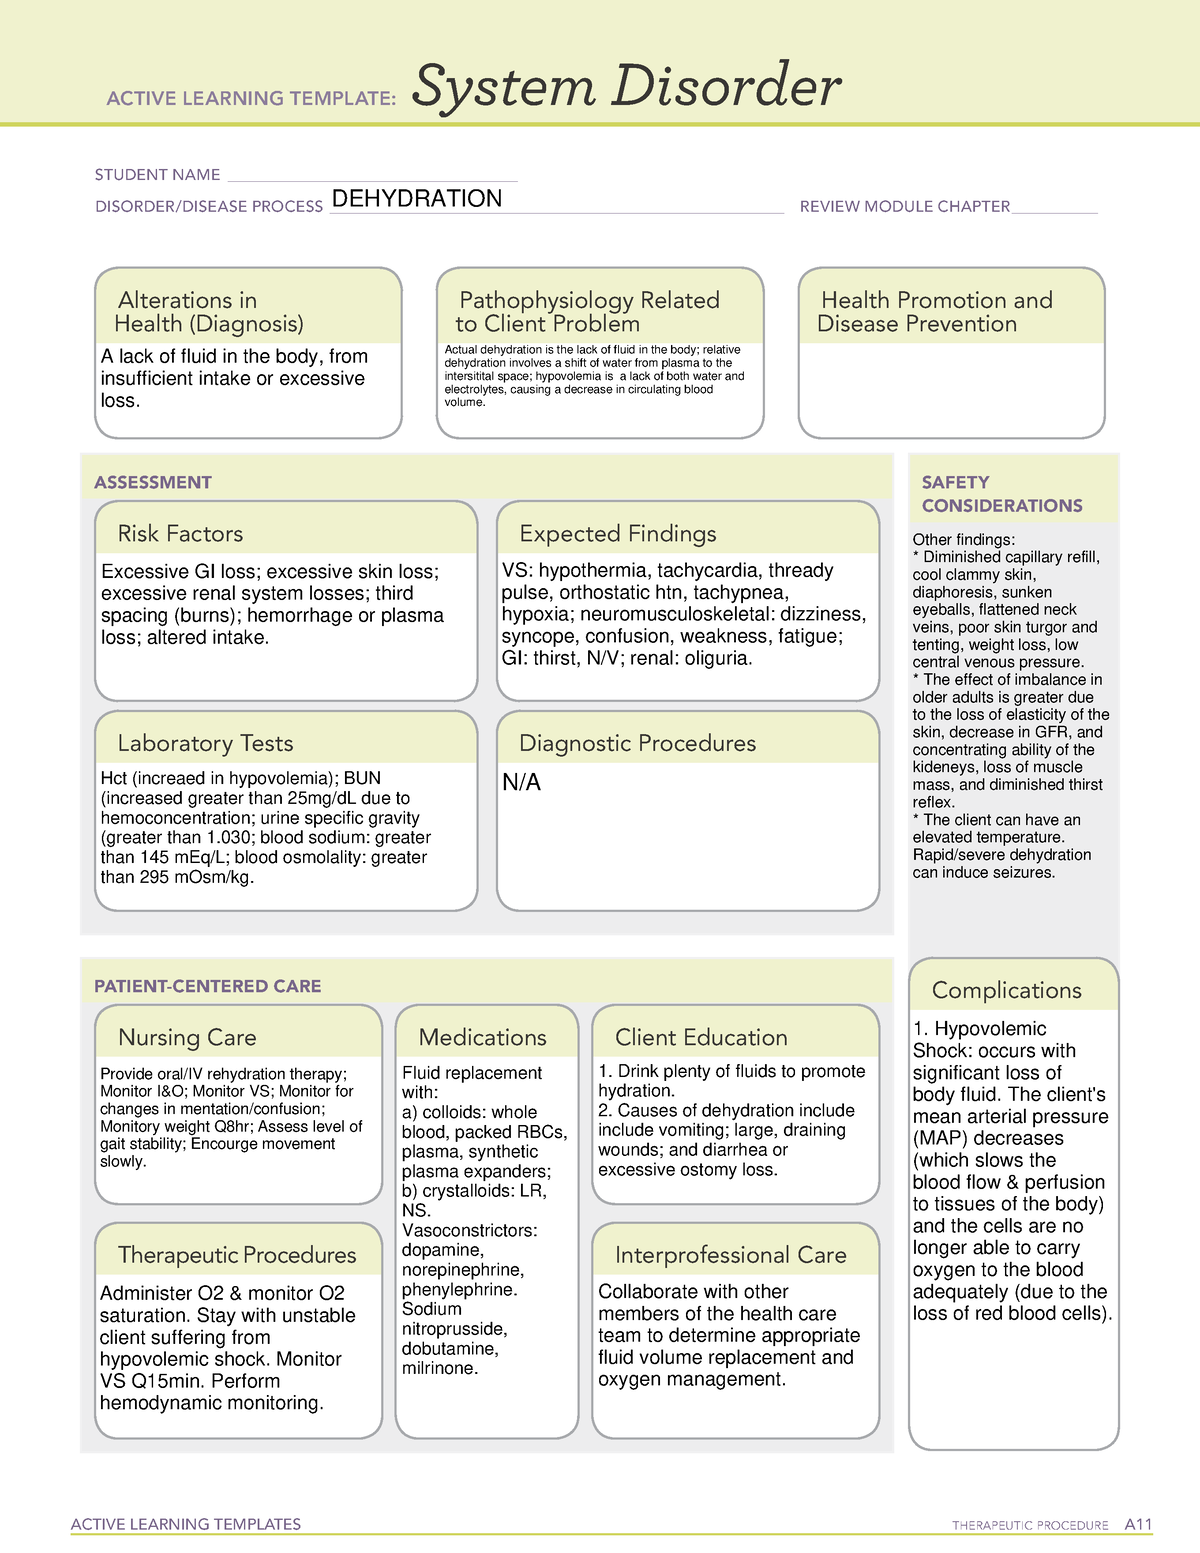 Dehydration ATI System Disorder ACTIVE LEARNING TEMPLATES